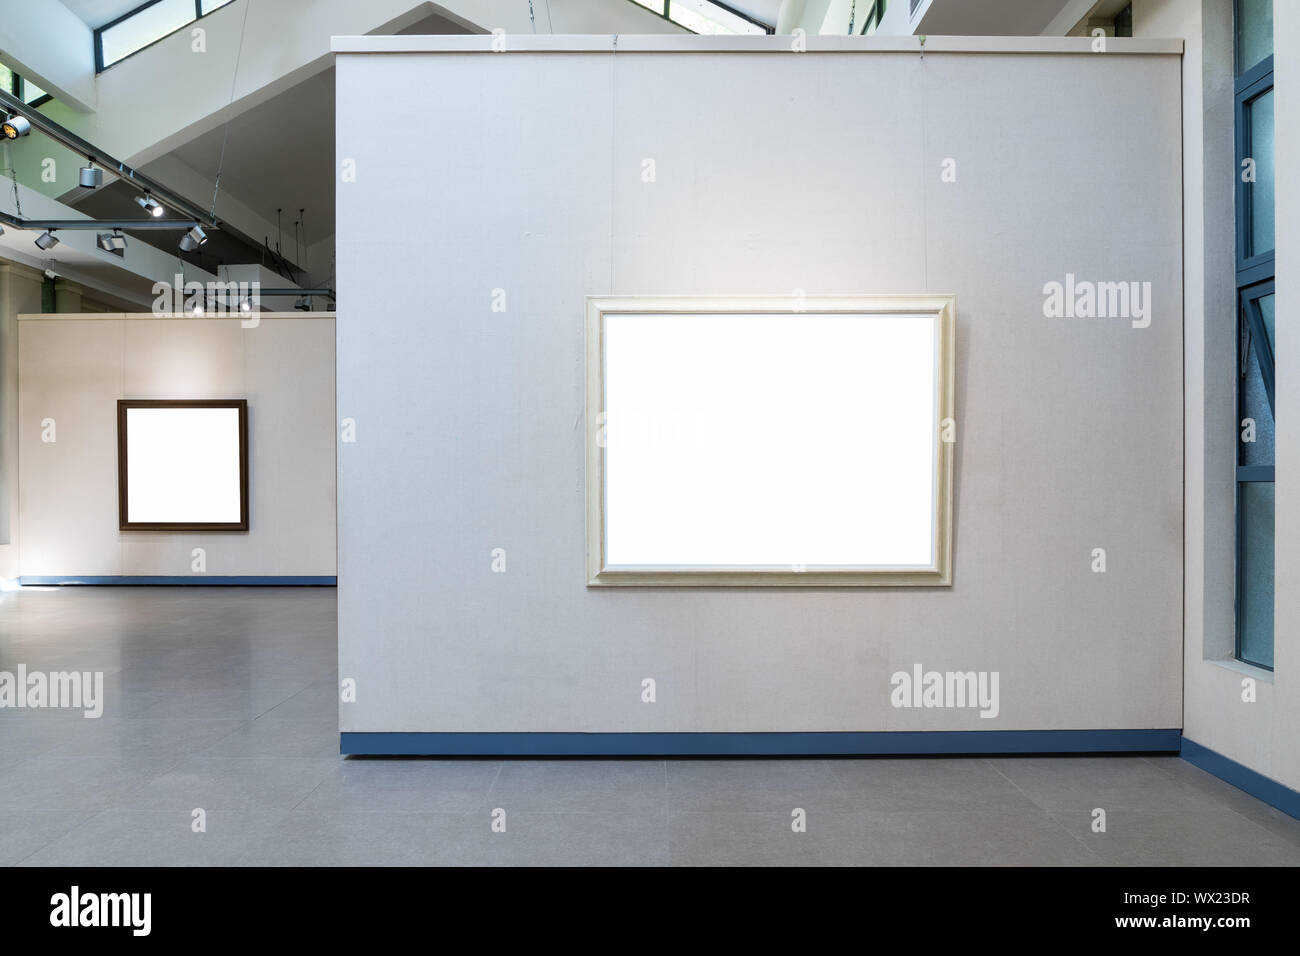 blank frames on exhibition wall in a room Stock Photo